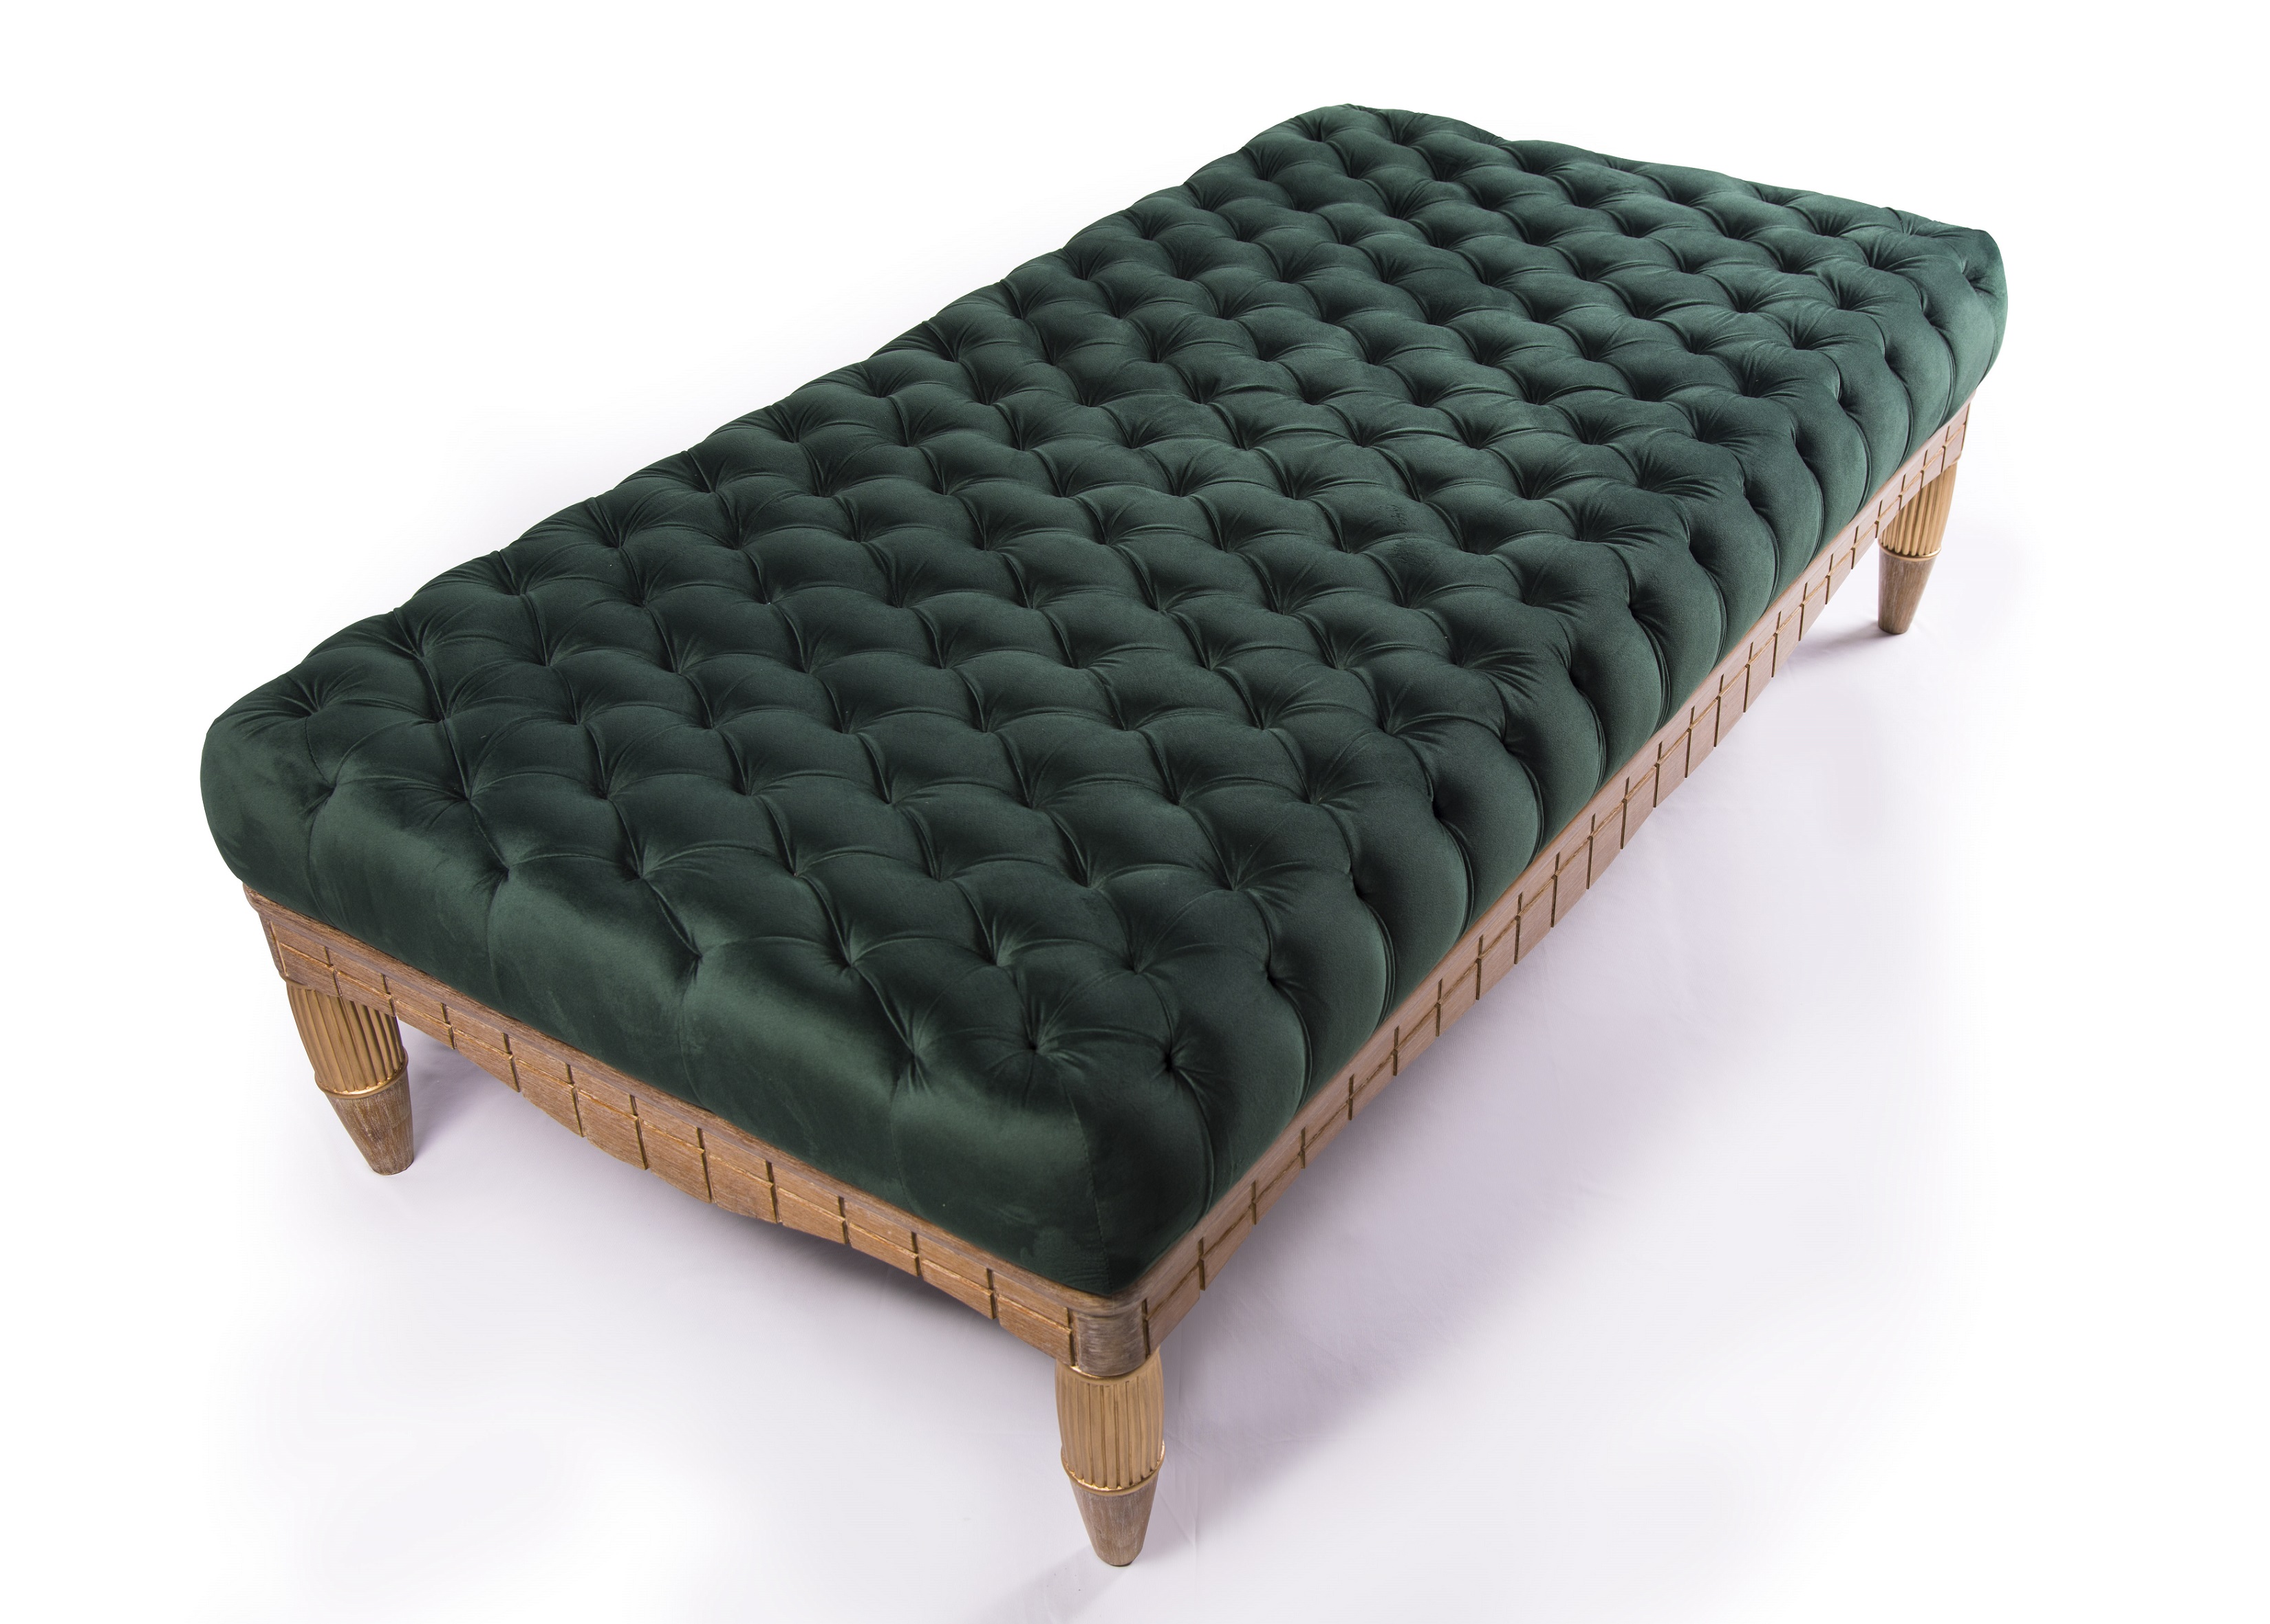 Forest ottoman available at Interior Designer Punam Kalra, Creative Director of I'm the Centre for Applied Arts